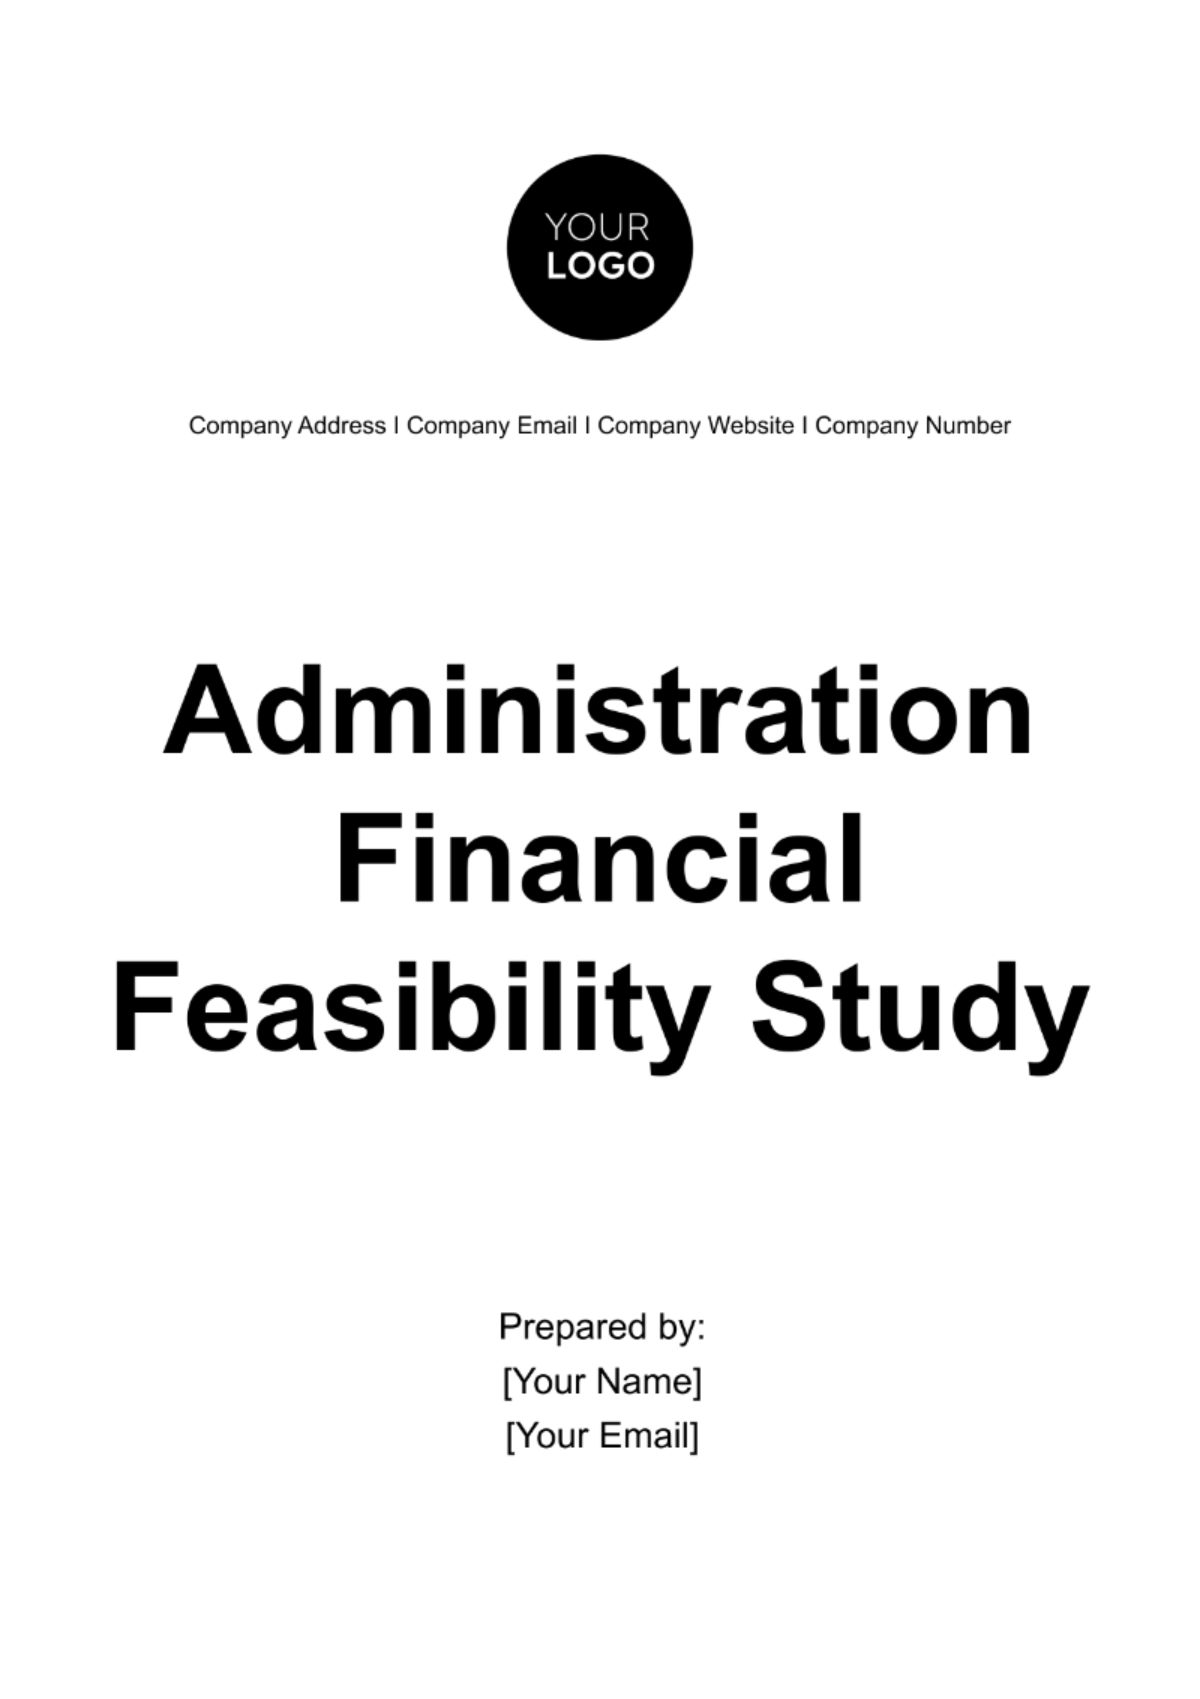 Administration Financial Feasibility Study Template